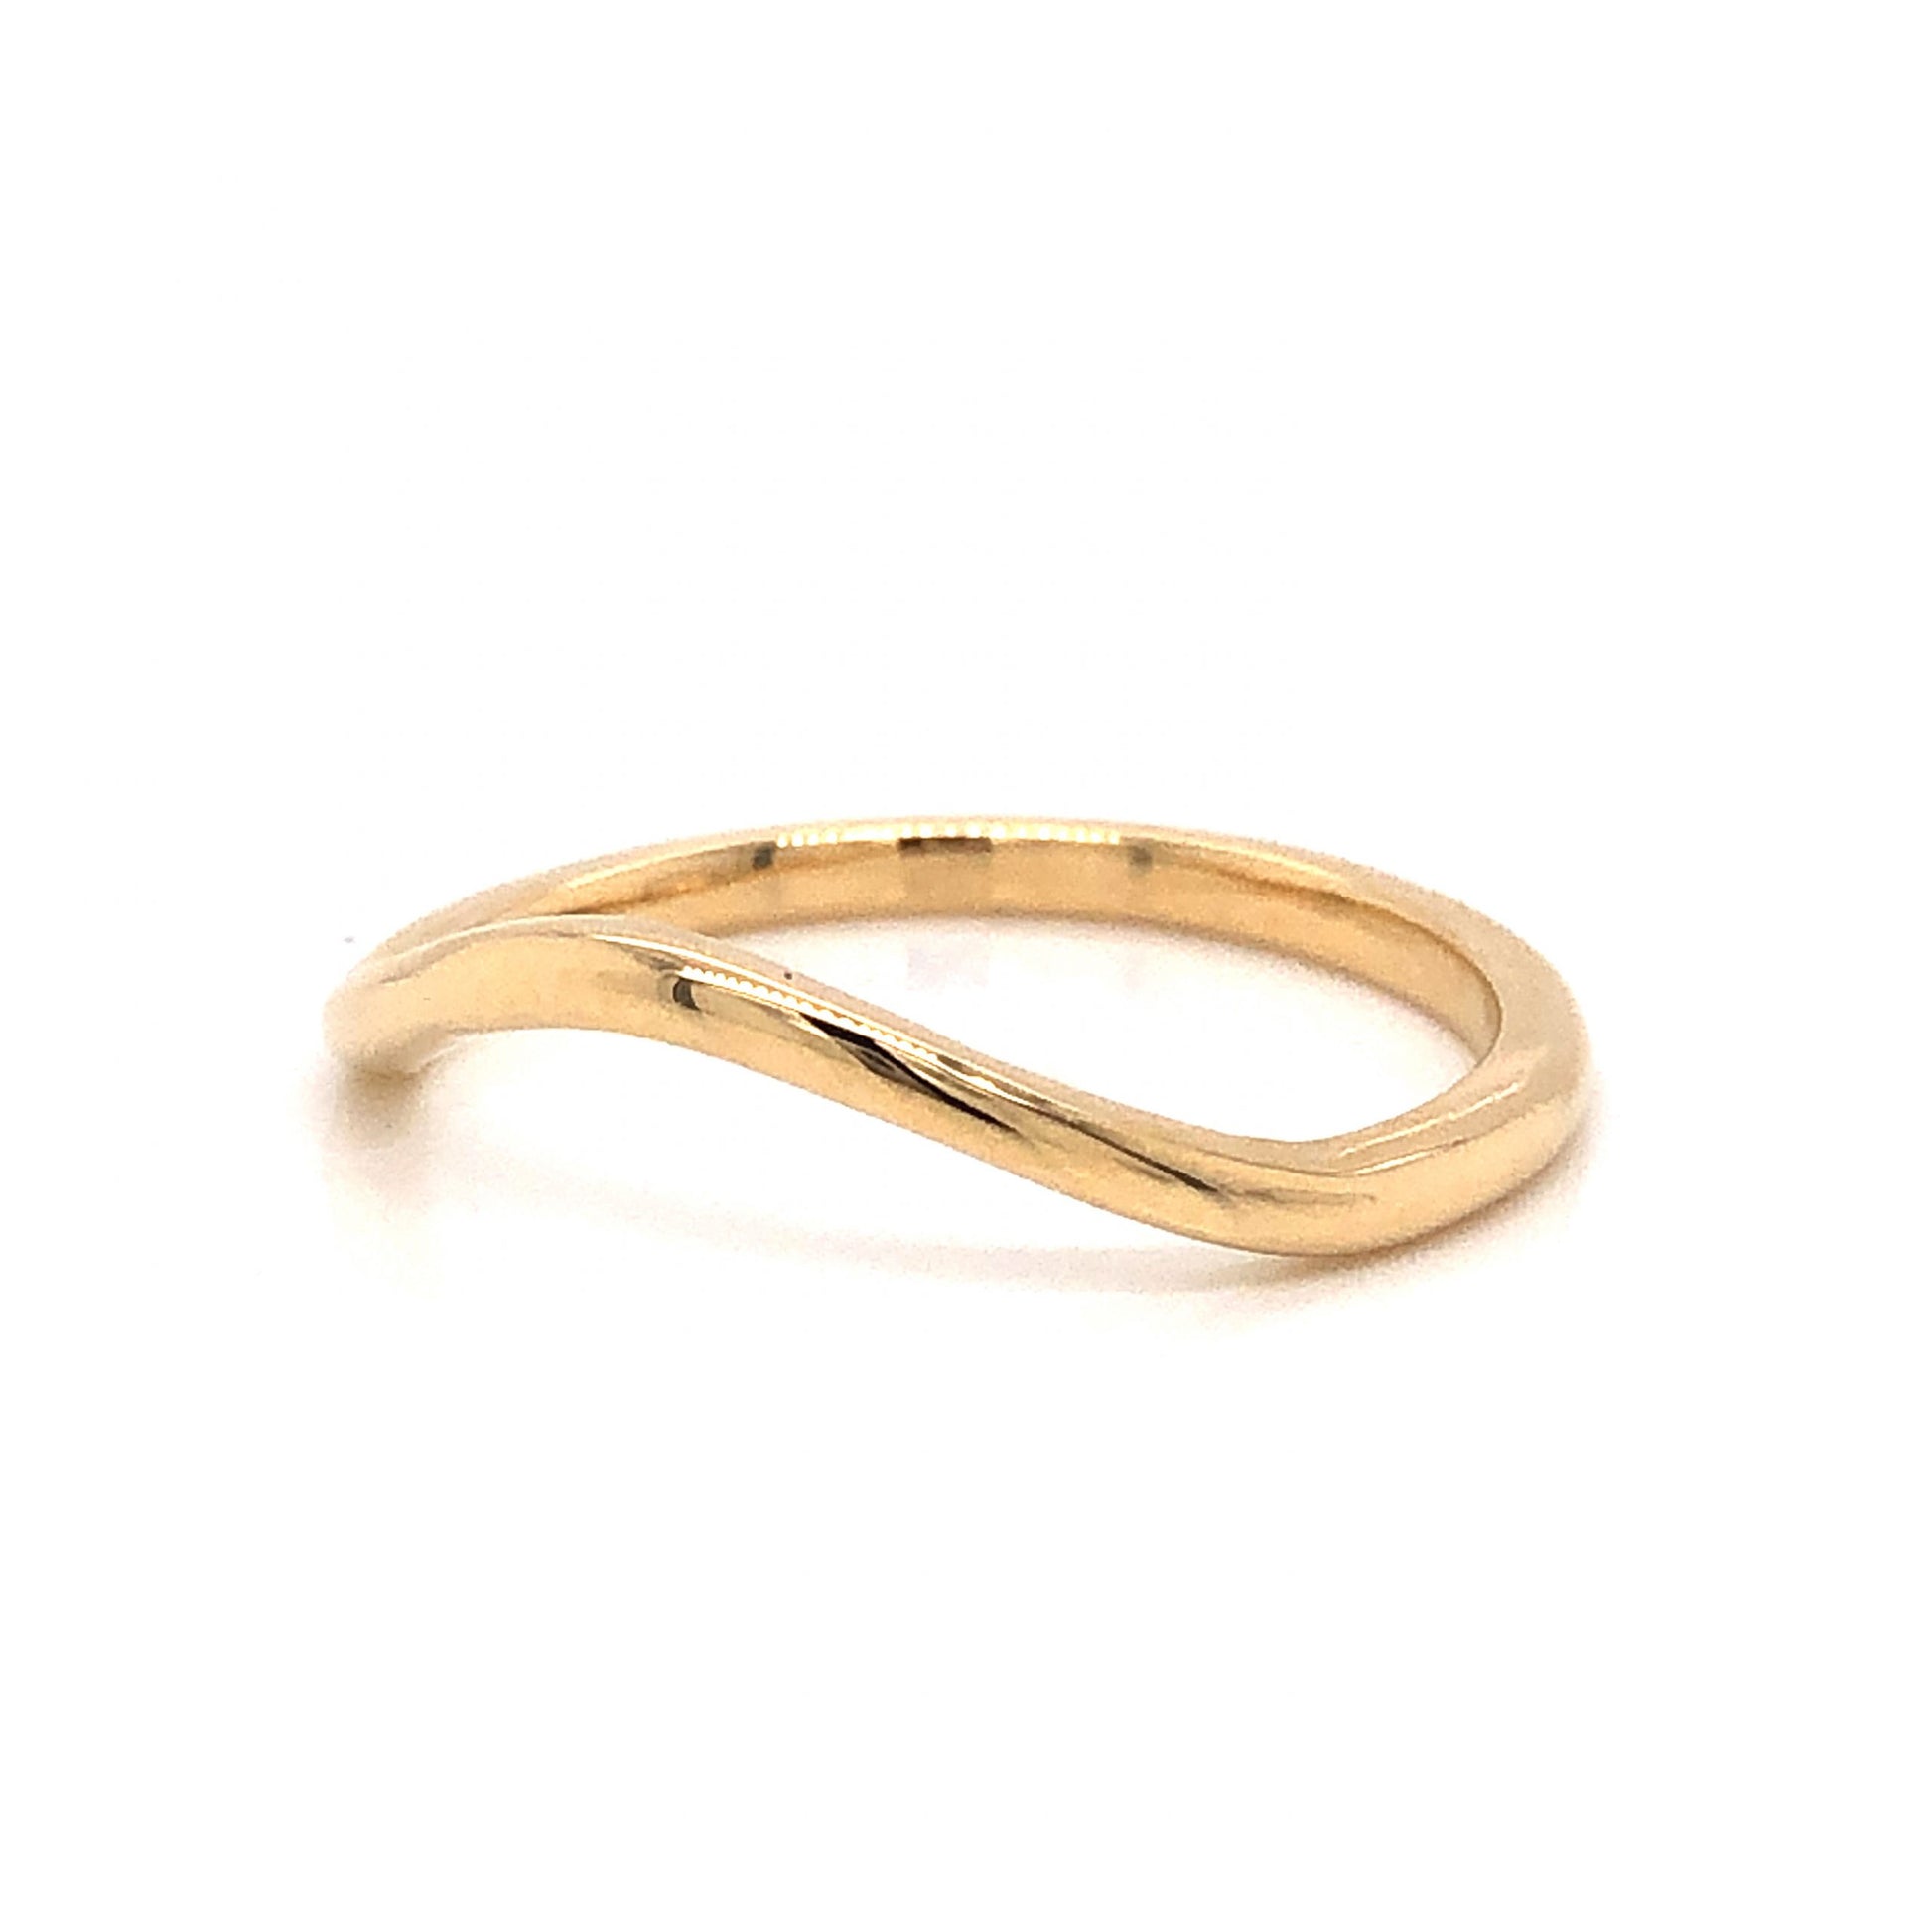 Simple Curved Wedding Band in 14k Yellow GoldComposition: 14 Karat Yellow GoldRing Size: 7.5Total Gram Weight: 2.1 gInscription: 14k